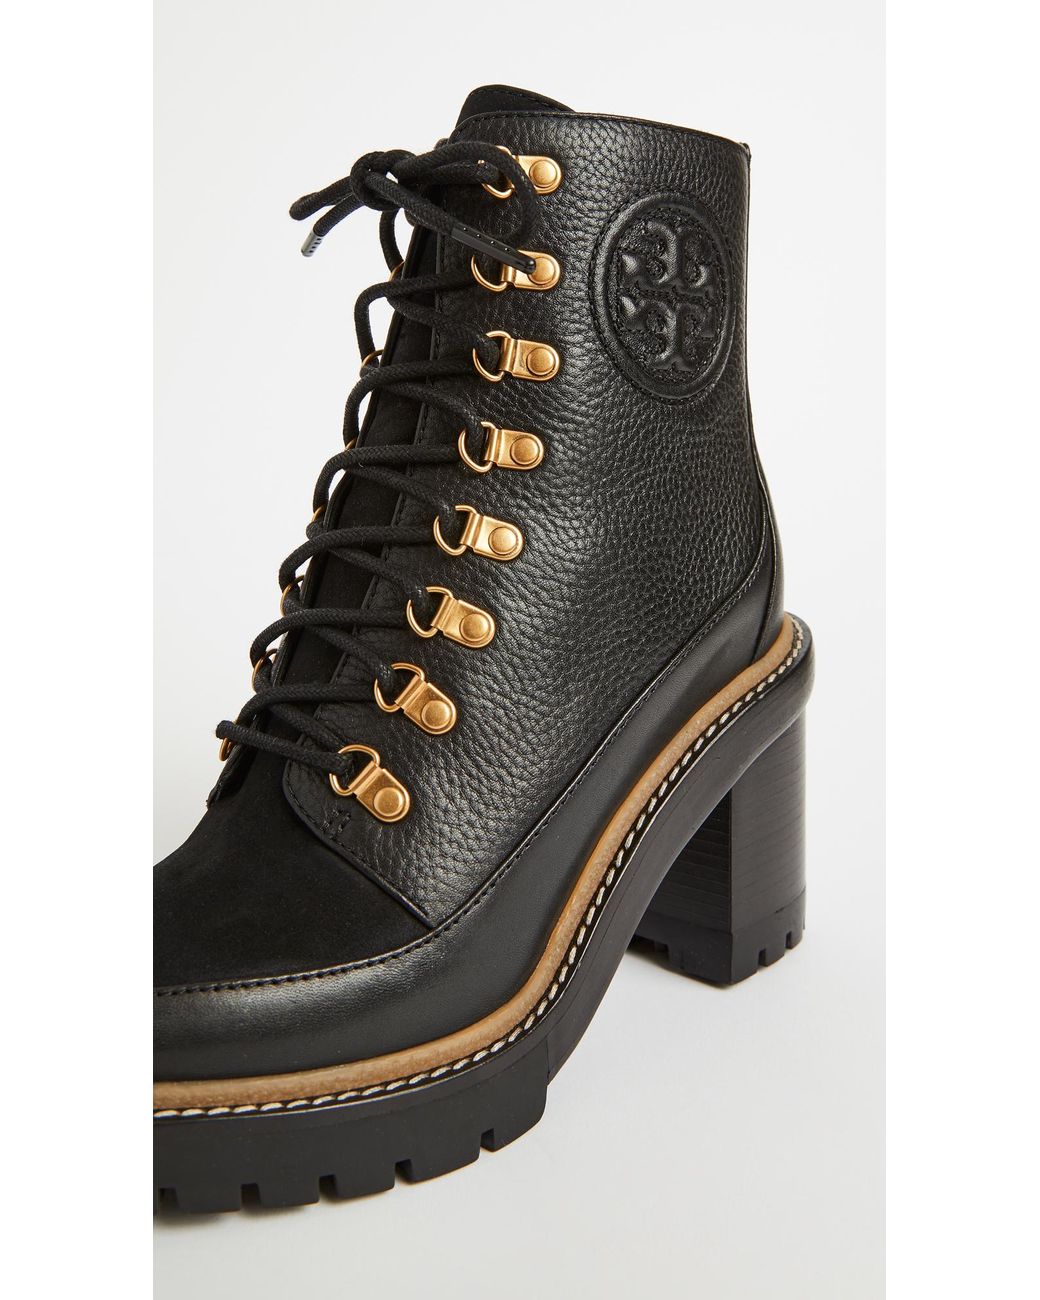 Tory Burch Leather Miller Mixed-materials Lug Sole Boot in Black 